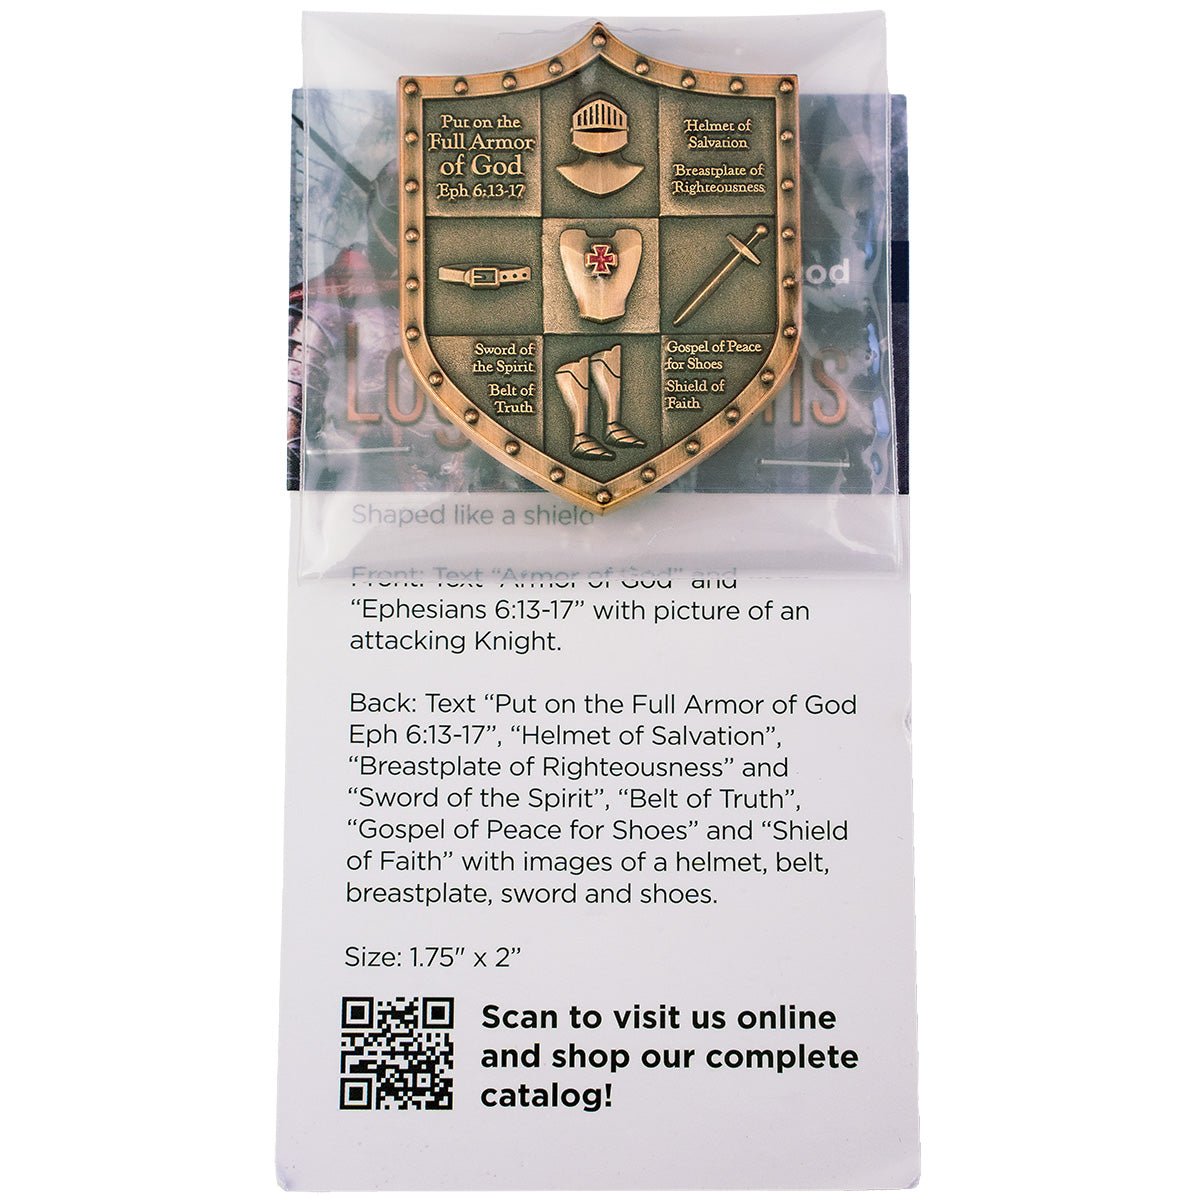 Flipped up coin showing package of Armor of God Shield Challenge Coin